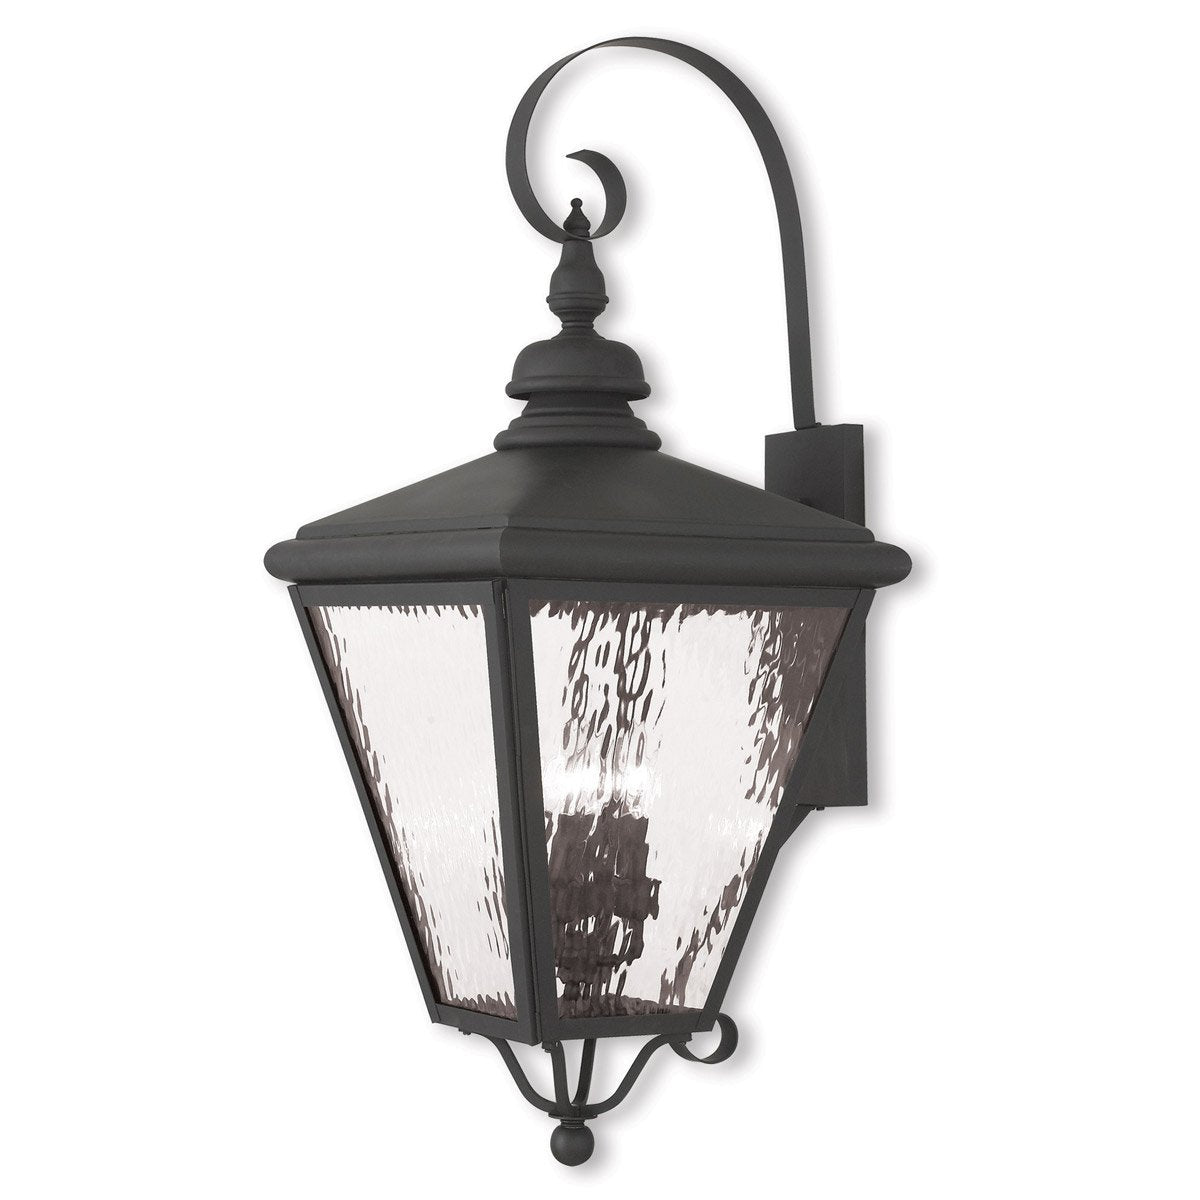 Livex 2036-04 Transitional Four Light Outdoor Wall Lantern from Cambridge Collection in Black Finish